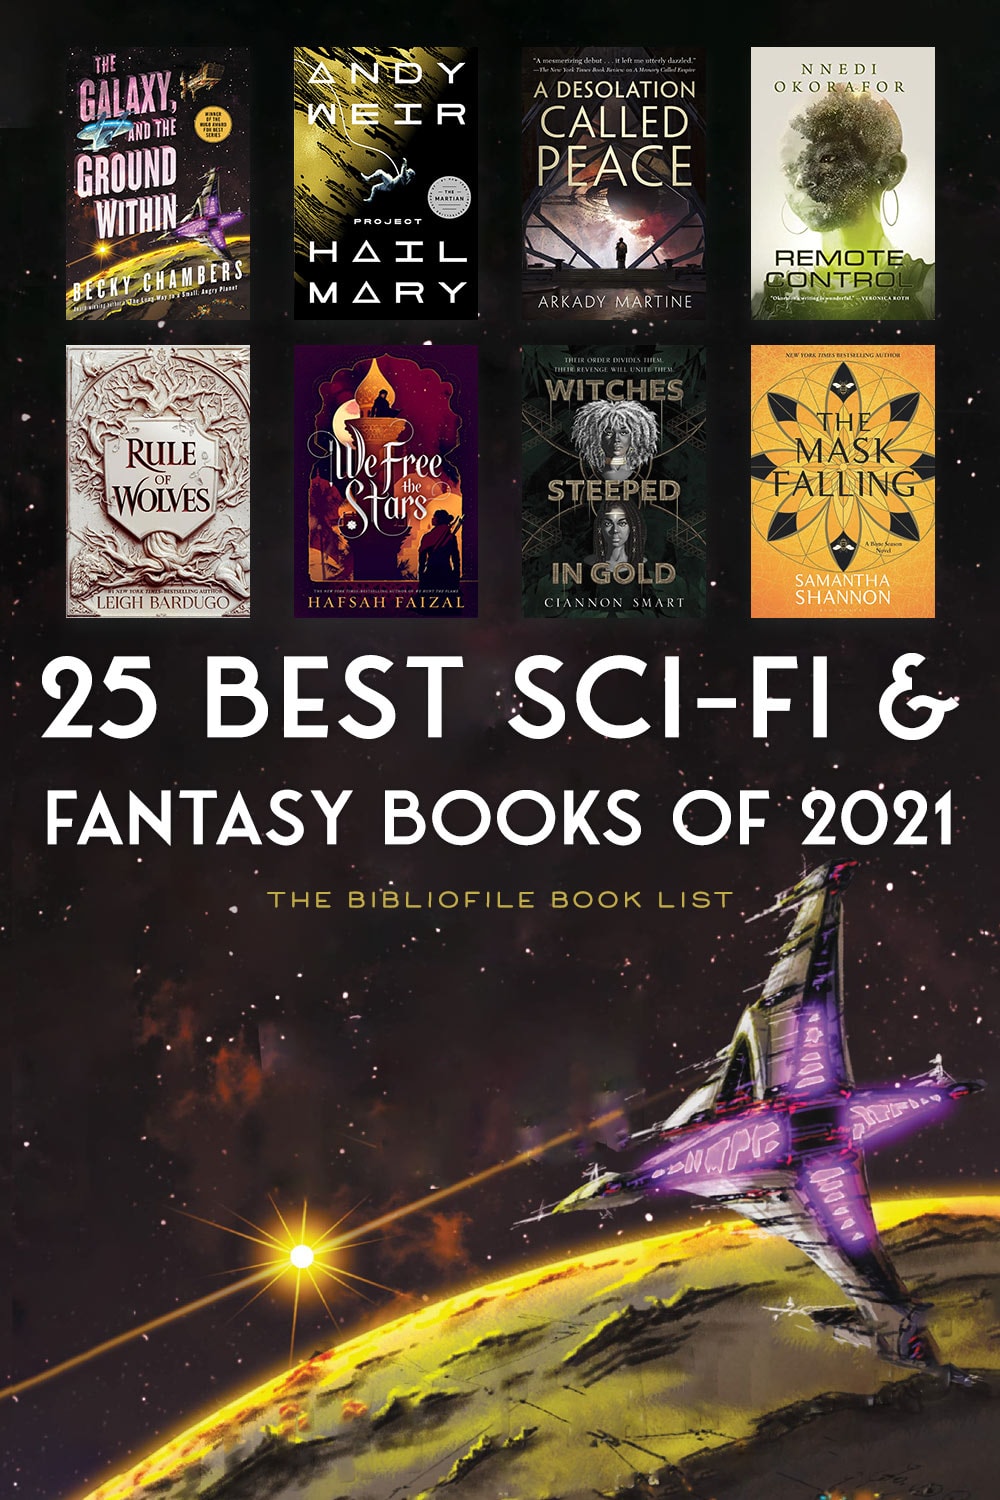 The Best Science Fiction & Fantasy Books of 2021 (Anticipated) The